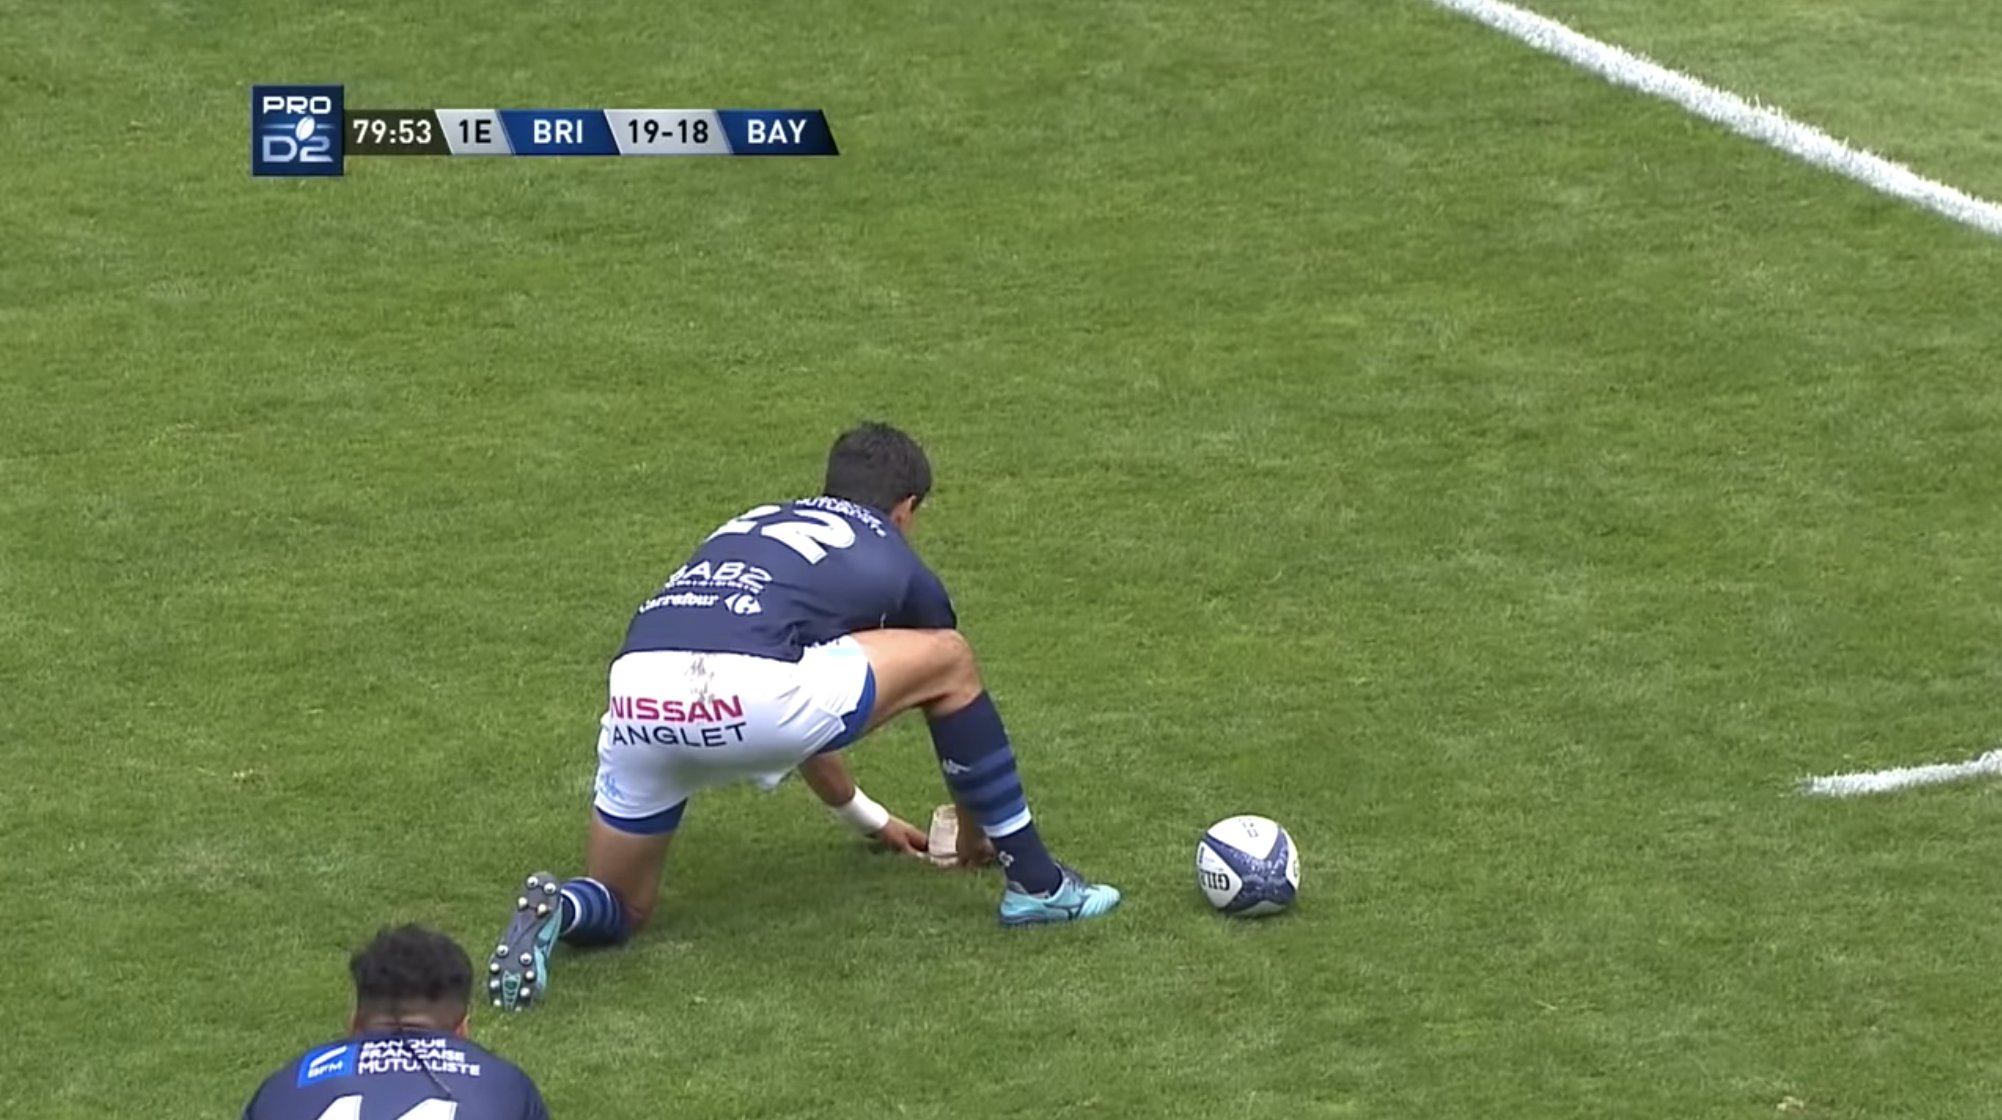 WATCH: The kick in the final play of the game that promoted Bayonne to the Top 14